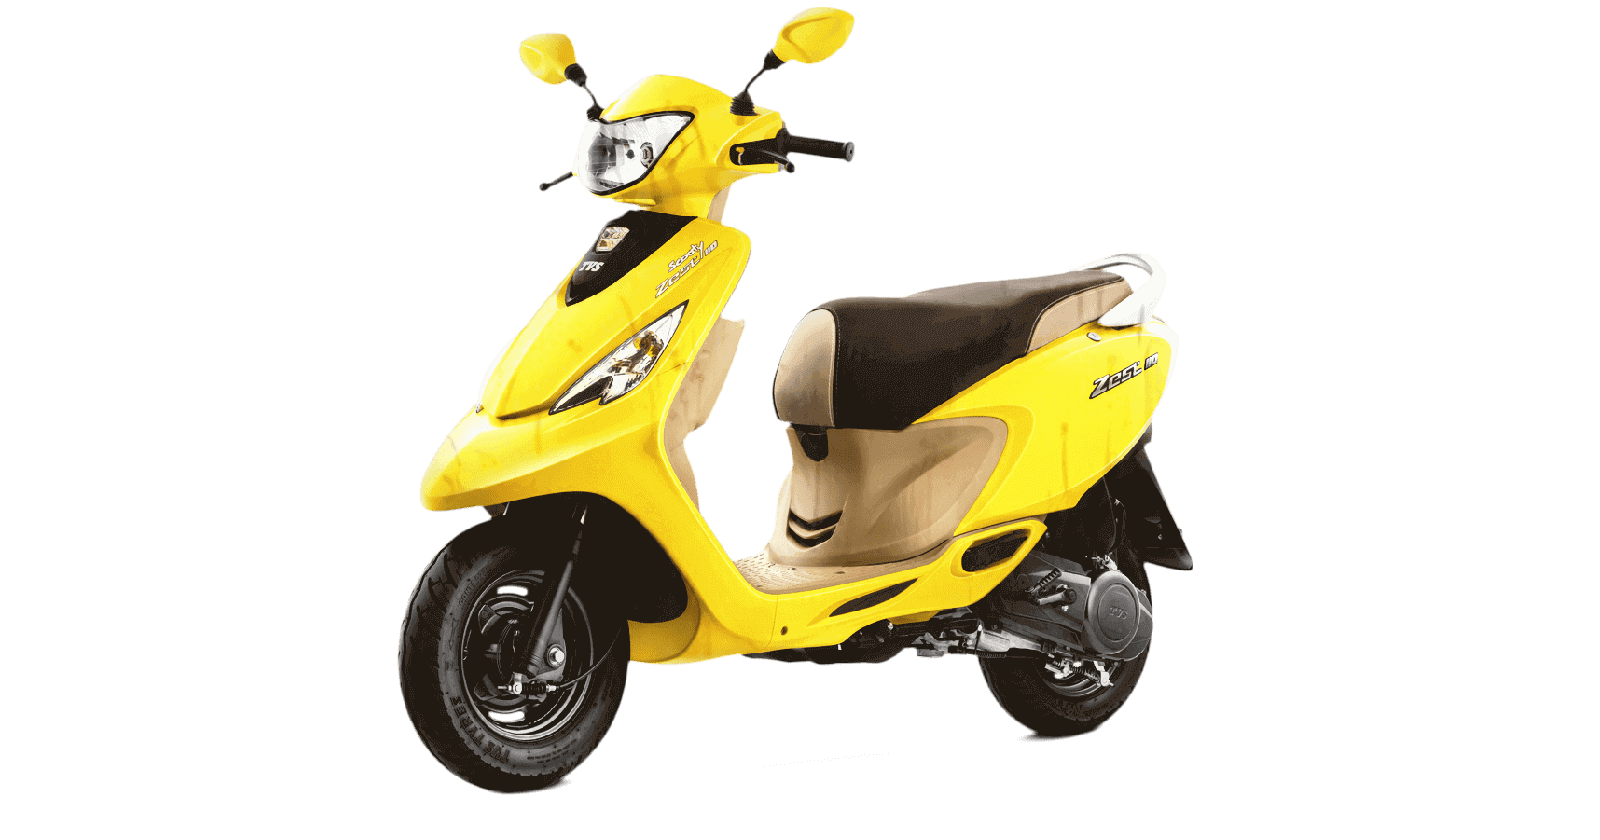 Best 110cc Scooters in India: Price and Mileage Details